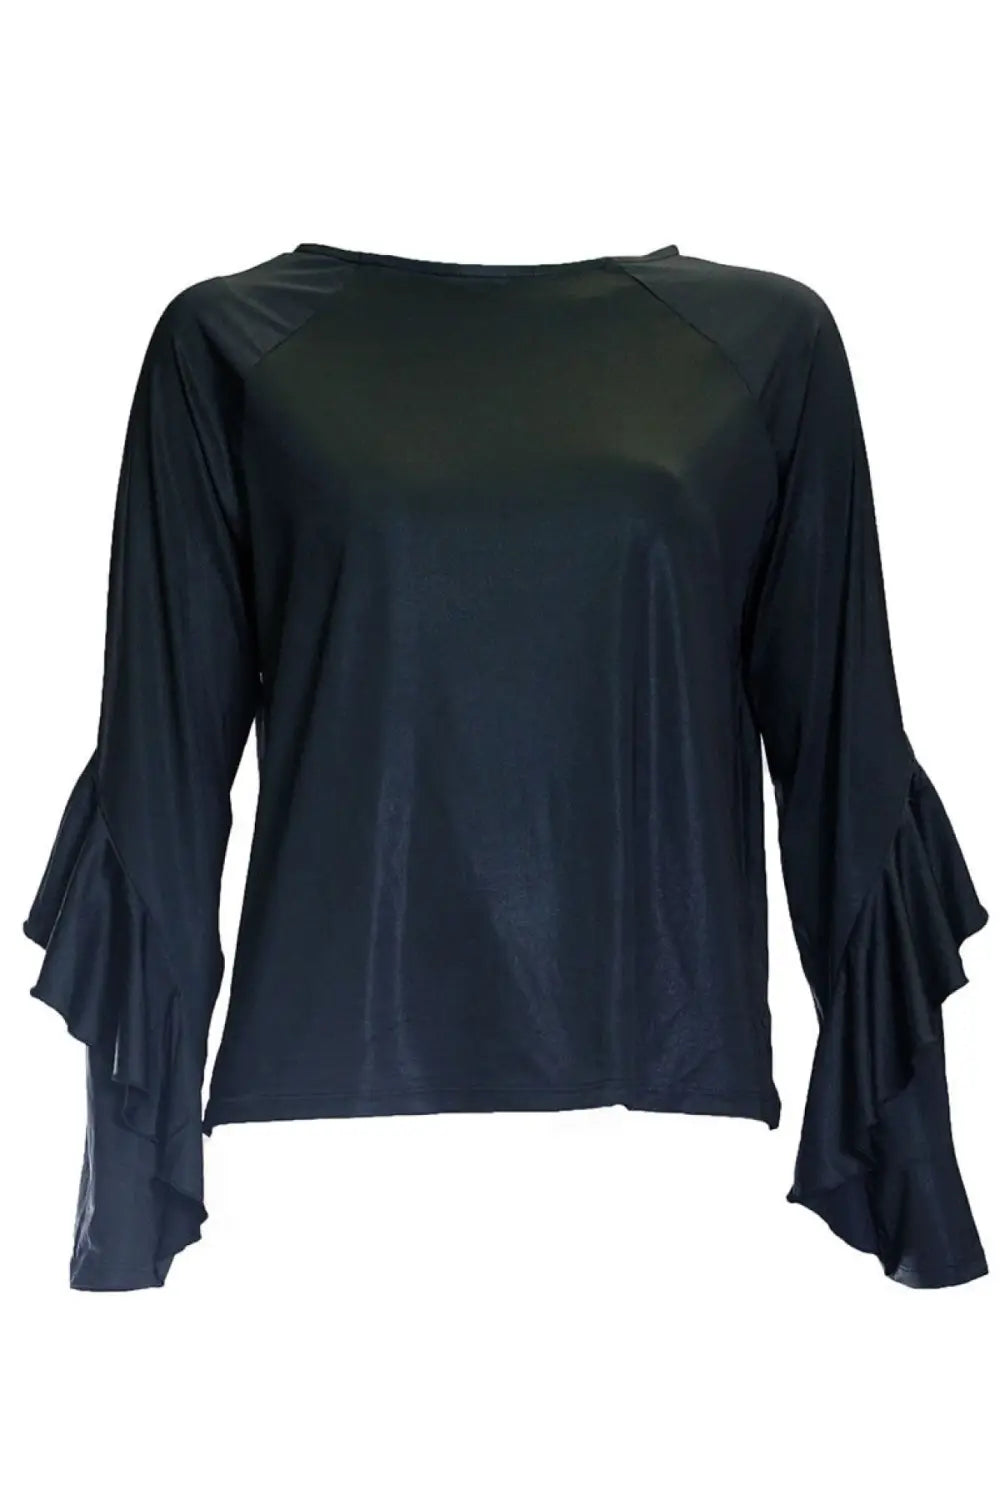 M&S Fishtail Sleeve Party Blouse